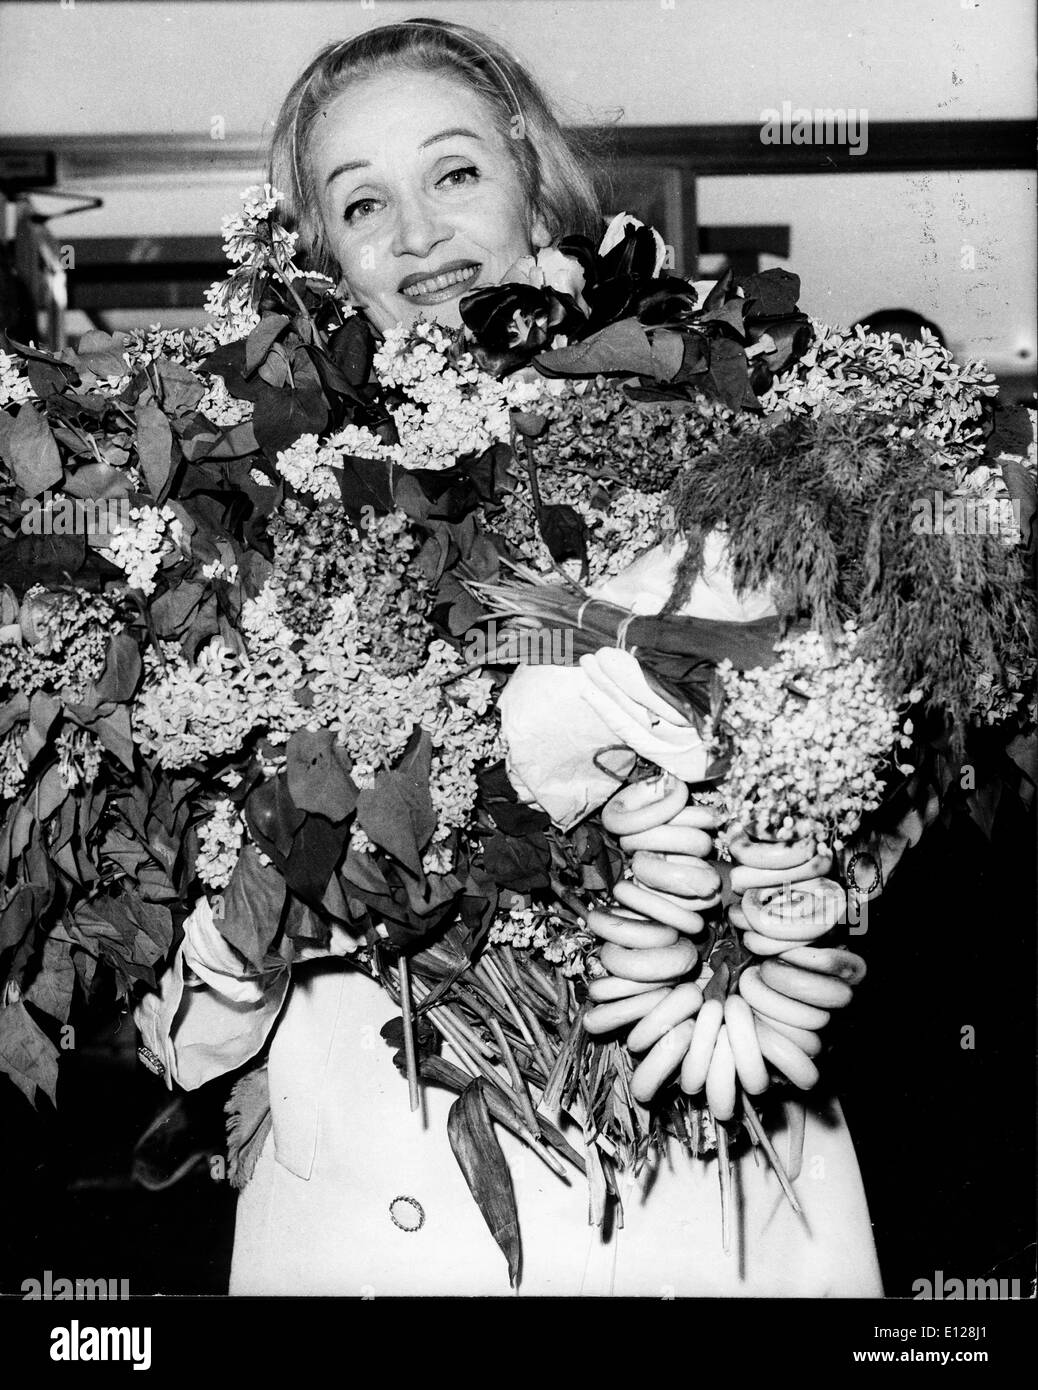 Apr 01, 2009 - London, England, United Kingdom - MARLENE DIETRICH (27 December 1901 Ð 6 May 1992) was a German-born American actress and singer. (Credit Image: KEYSTONE Pictures USA/ZUMAPRESS.com) Stock Photo